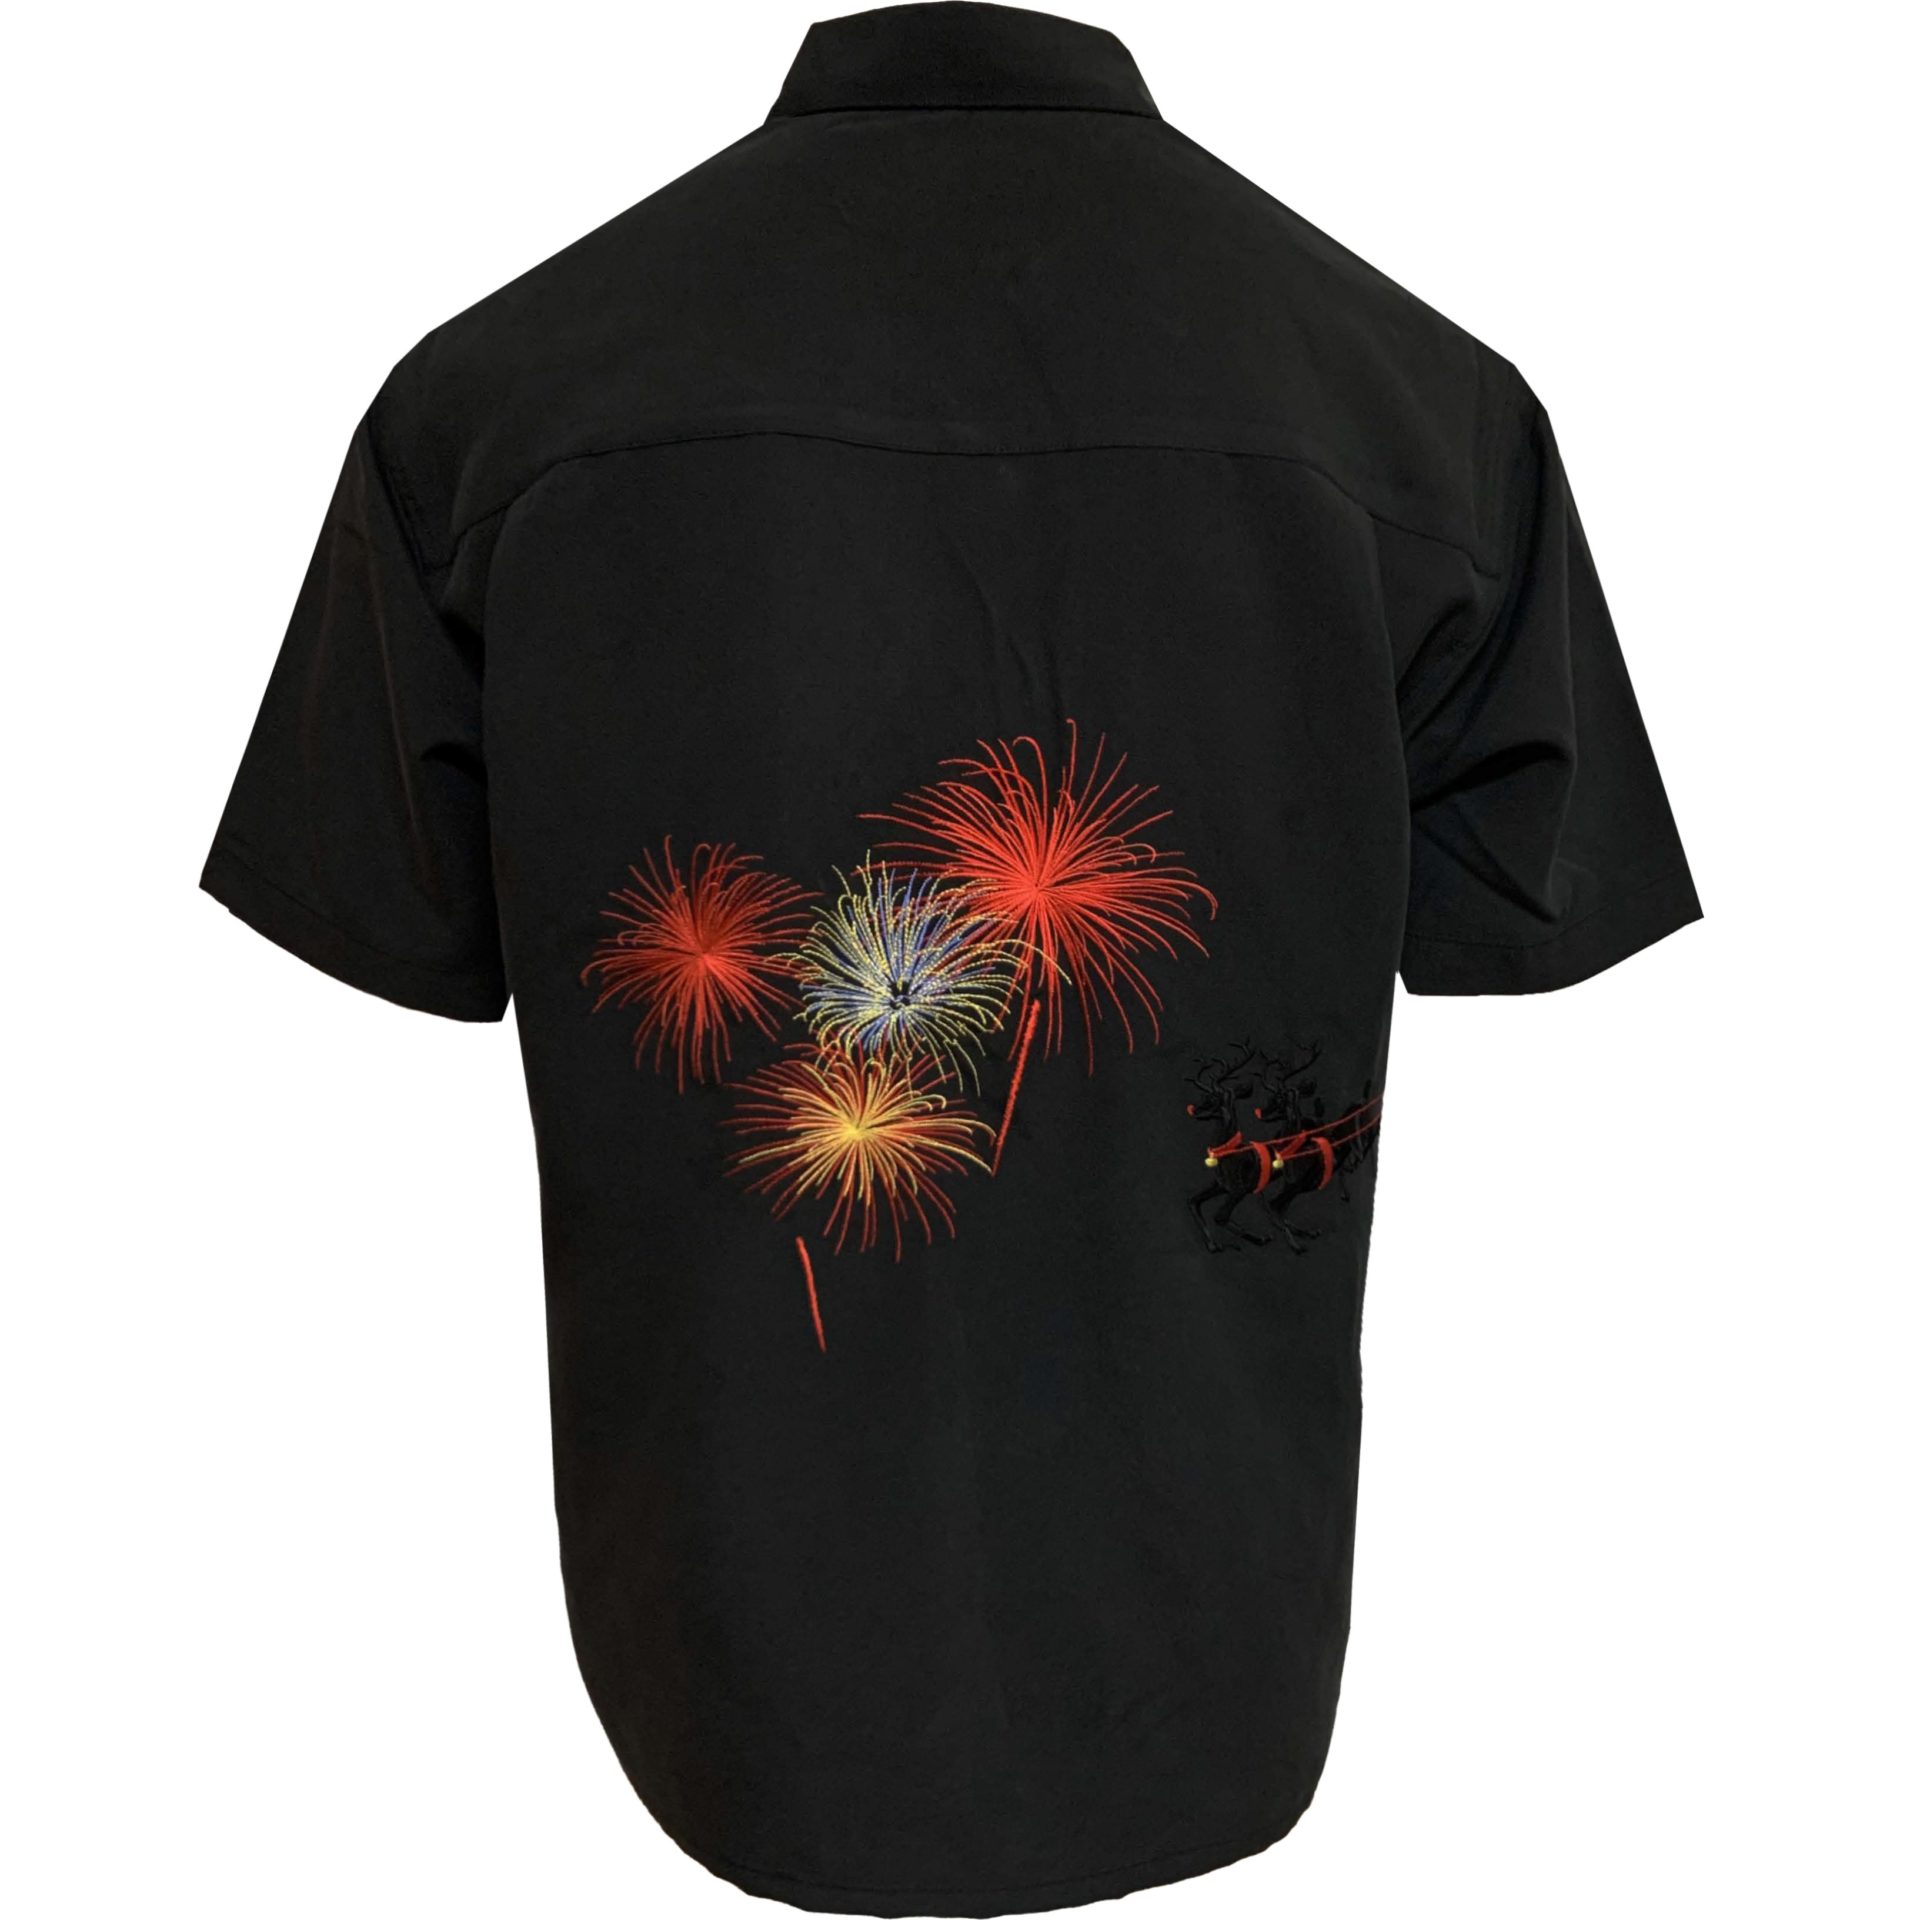 Bamboo-Cay-Mens-Shirt-Merry-Christmas-Happy-New-Year-black-back-view